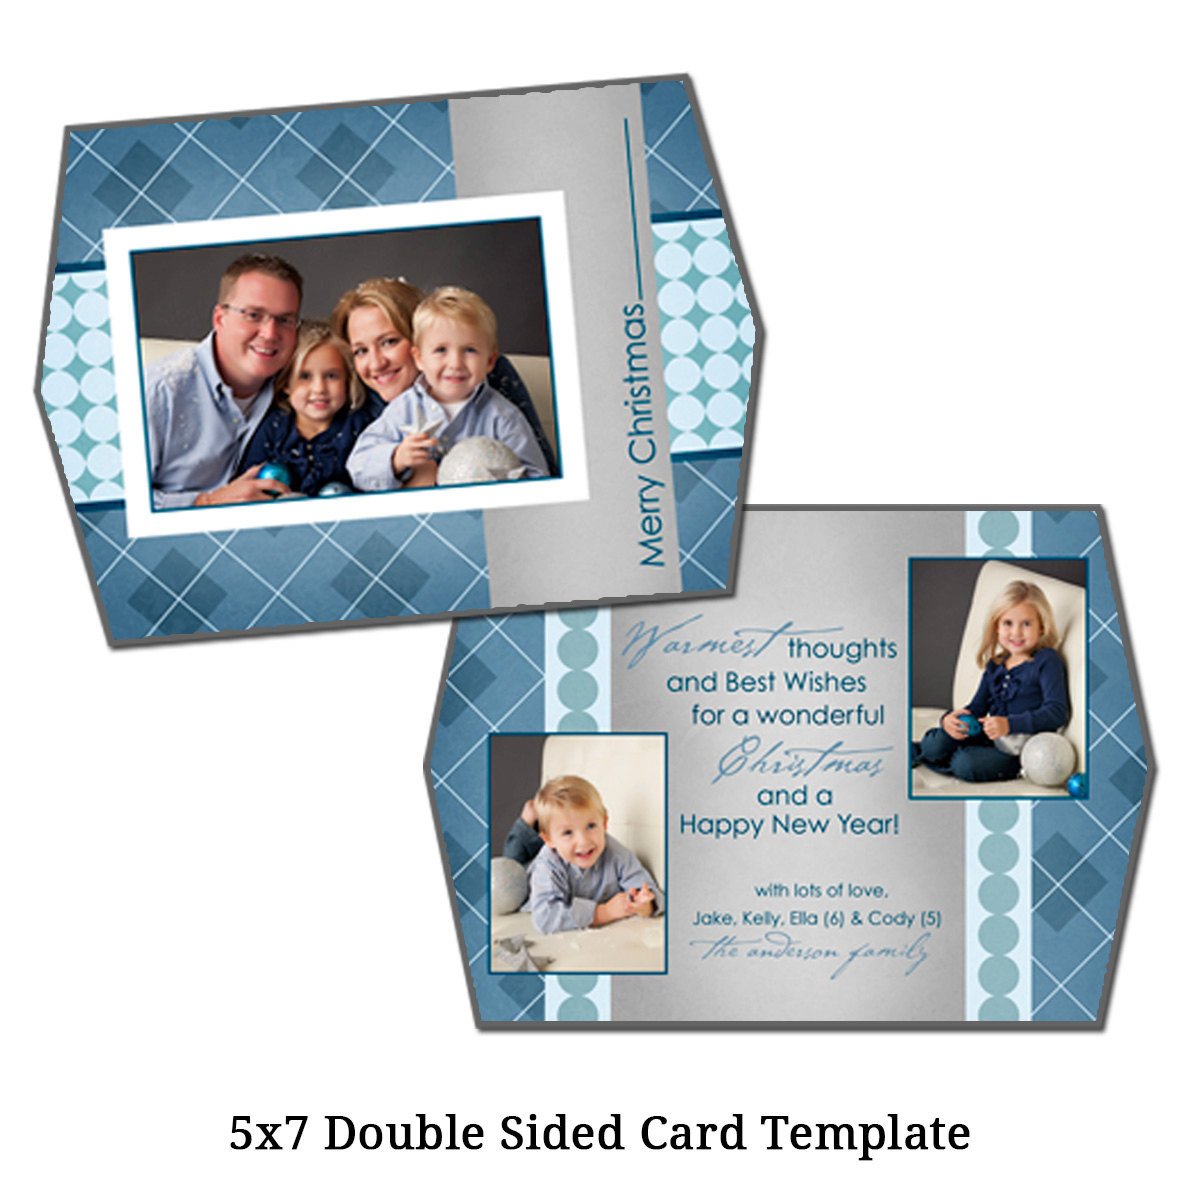 5x7 Double Sided Christmas Card Template by VGalleryDesigns